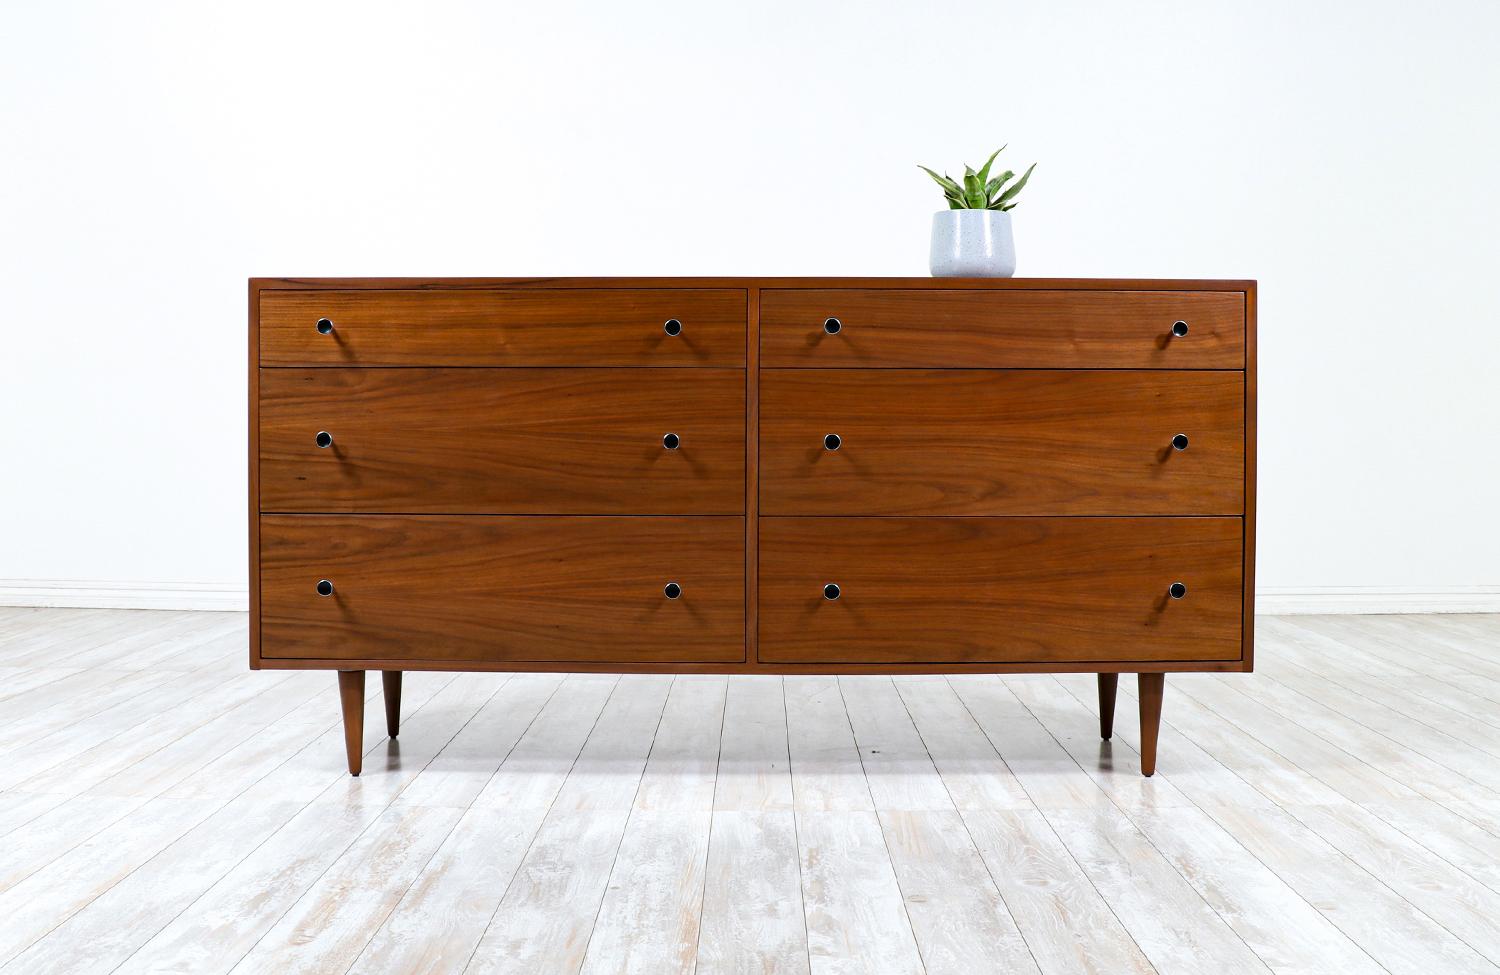 Mid-century modern dresser designed by Kipp Stewart and Stewart MacDougall for Glenn of California in the United States circa 1950s. Newly refinished by our expert craftsmen, this spectacular six-drawer dresser features dovetailed construction and a